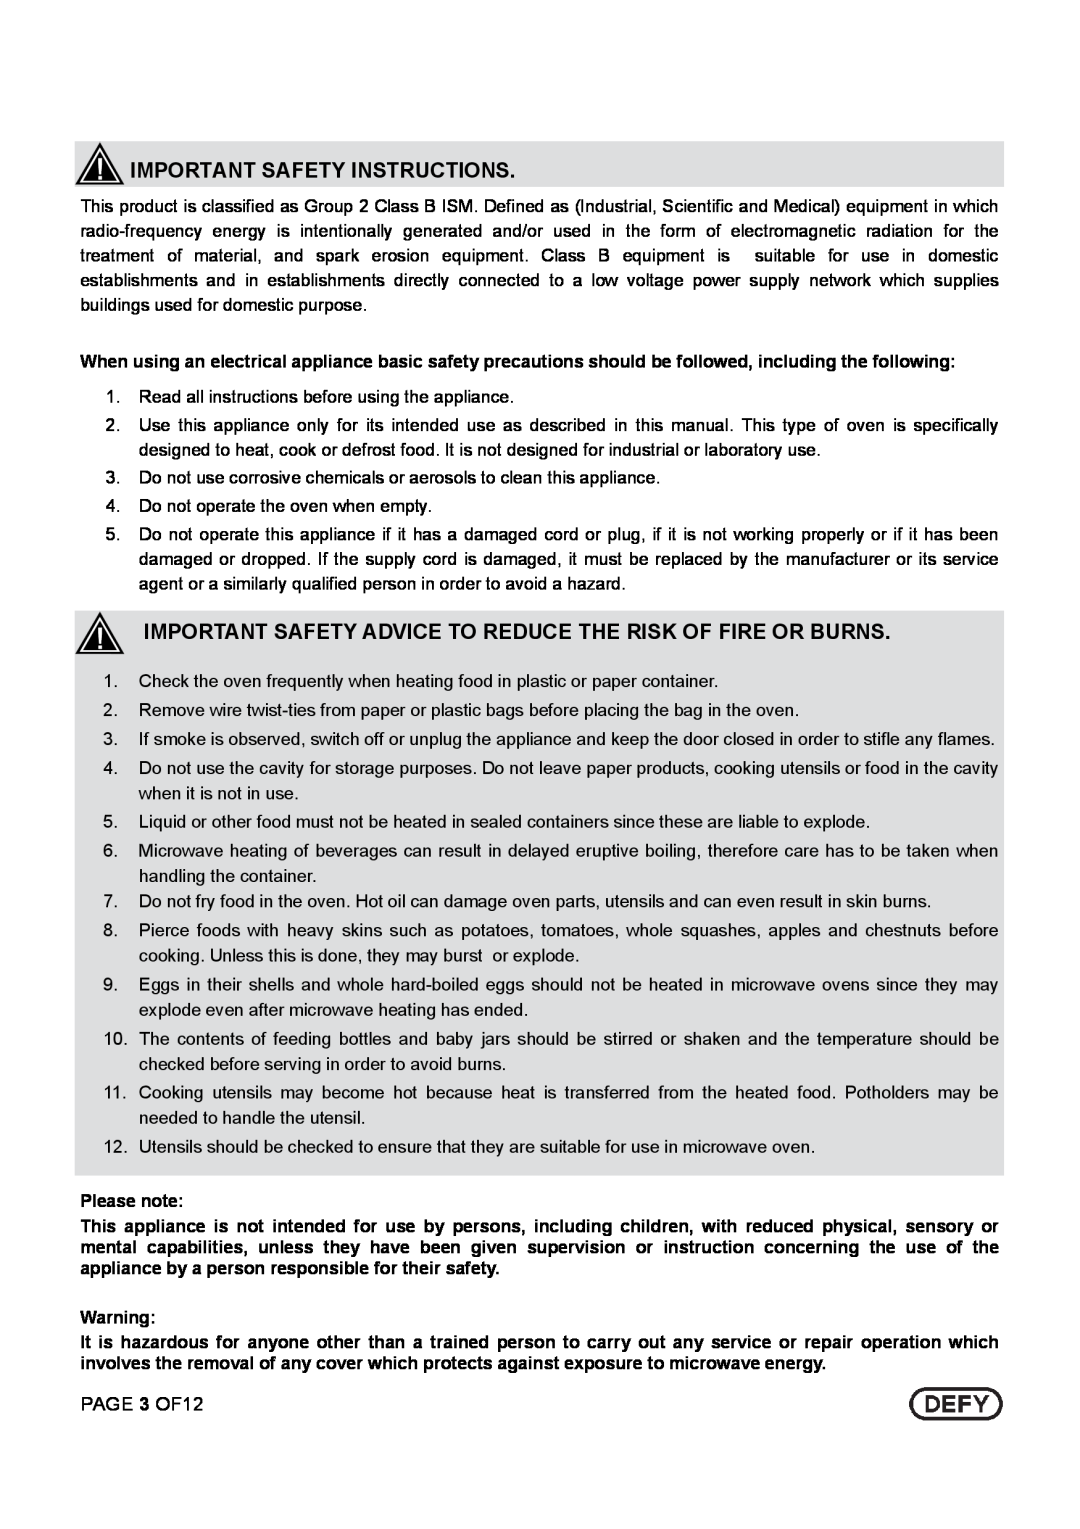 Defy Appliances DMO 343 owner manual Important Safety Instructions, PAGE 3 OF12, Please note 